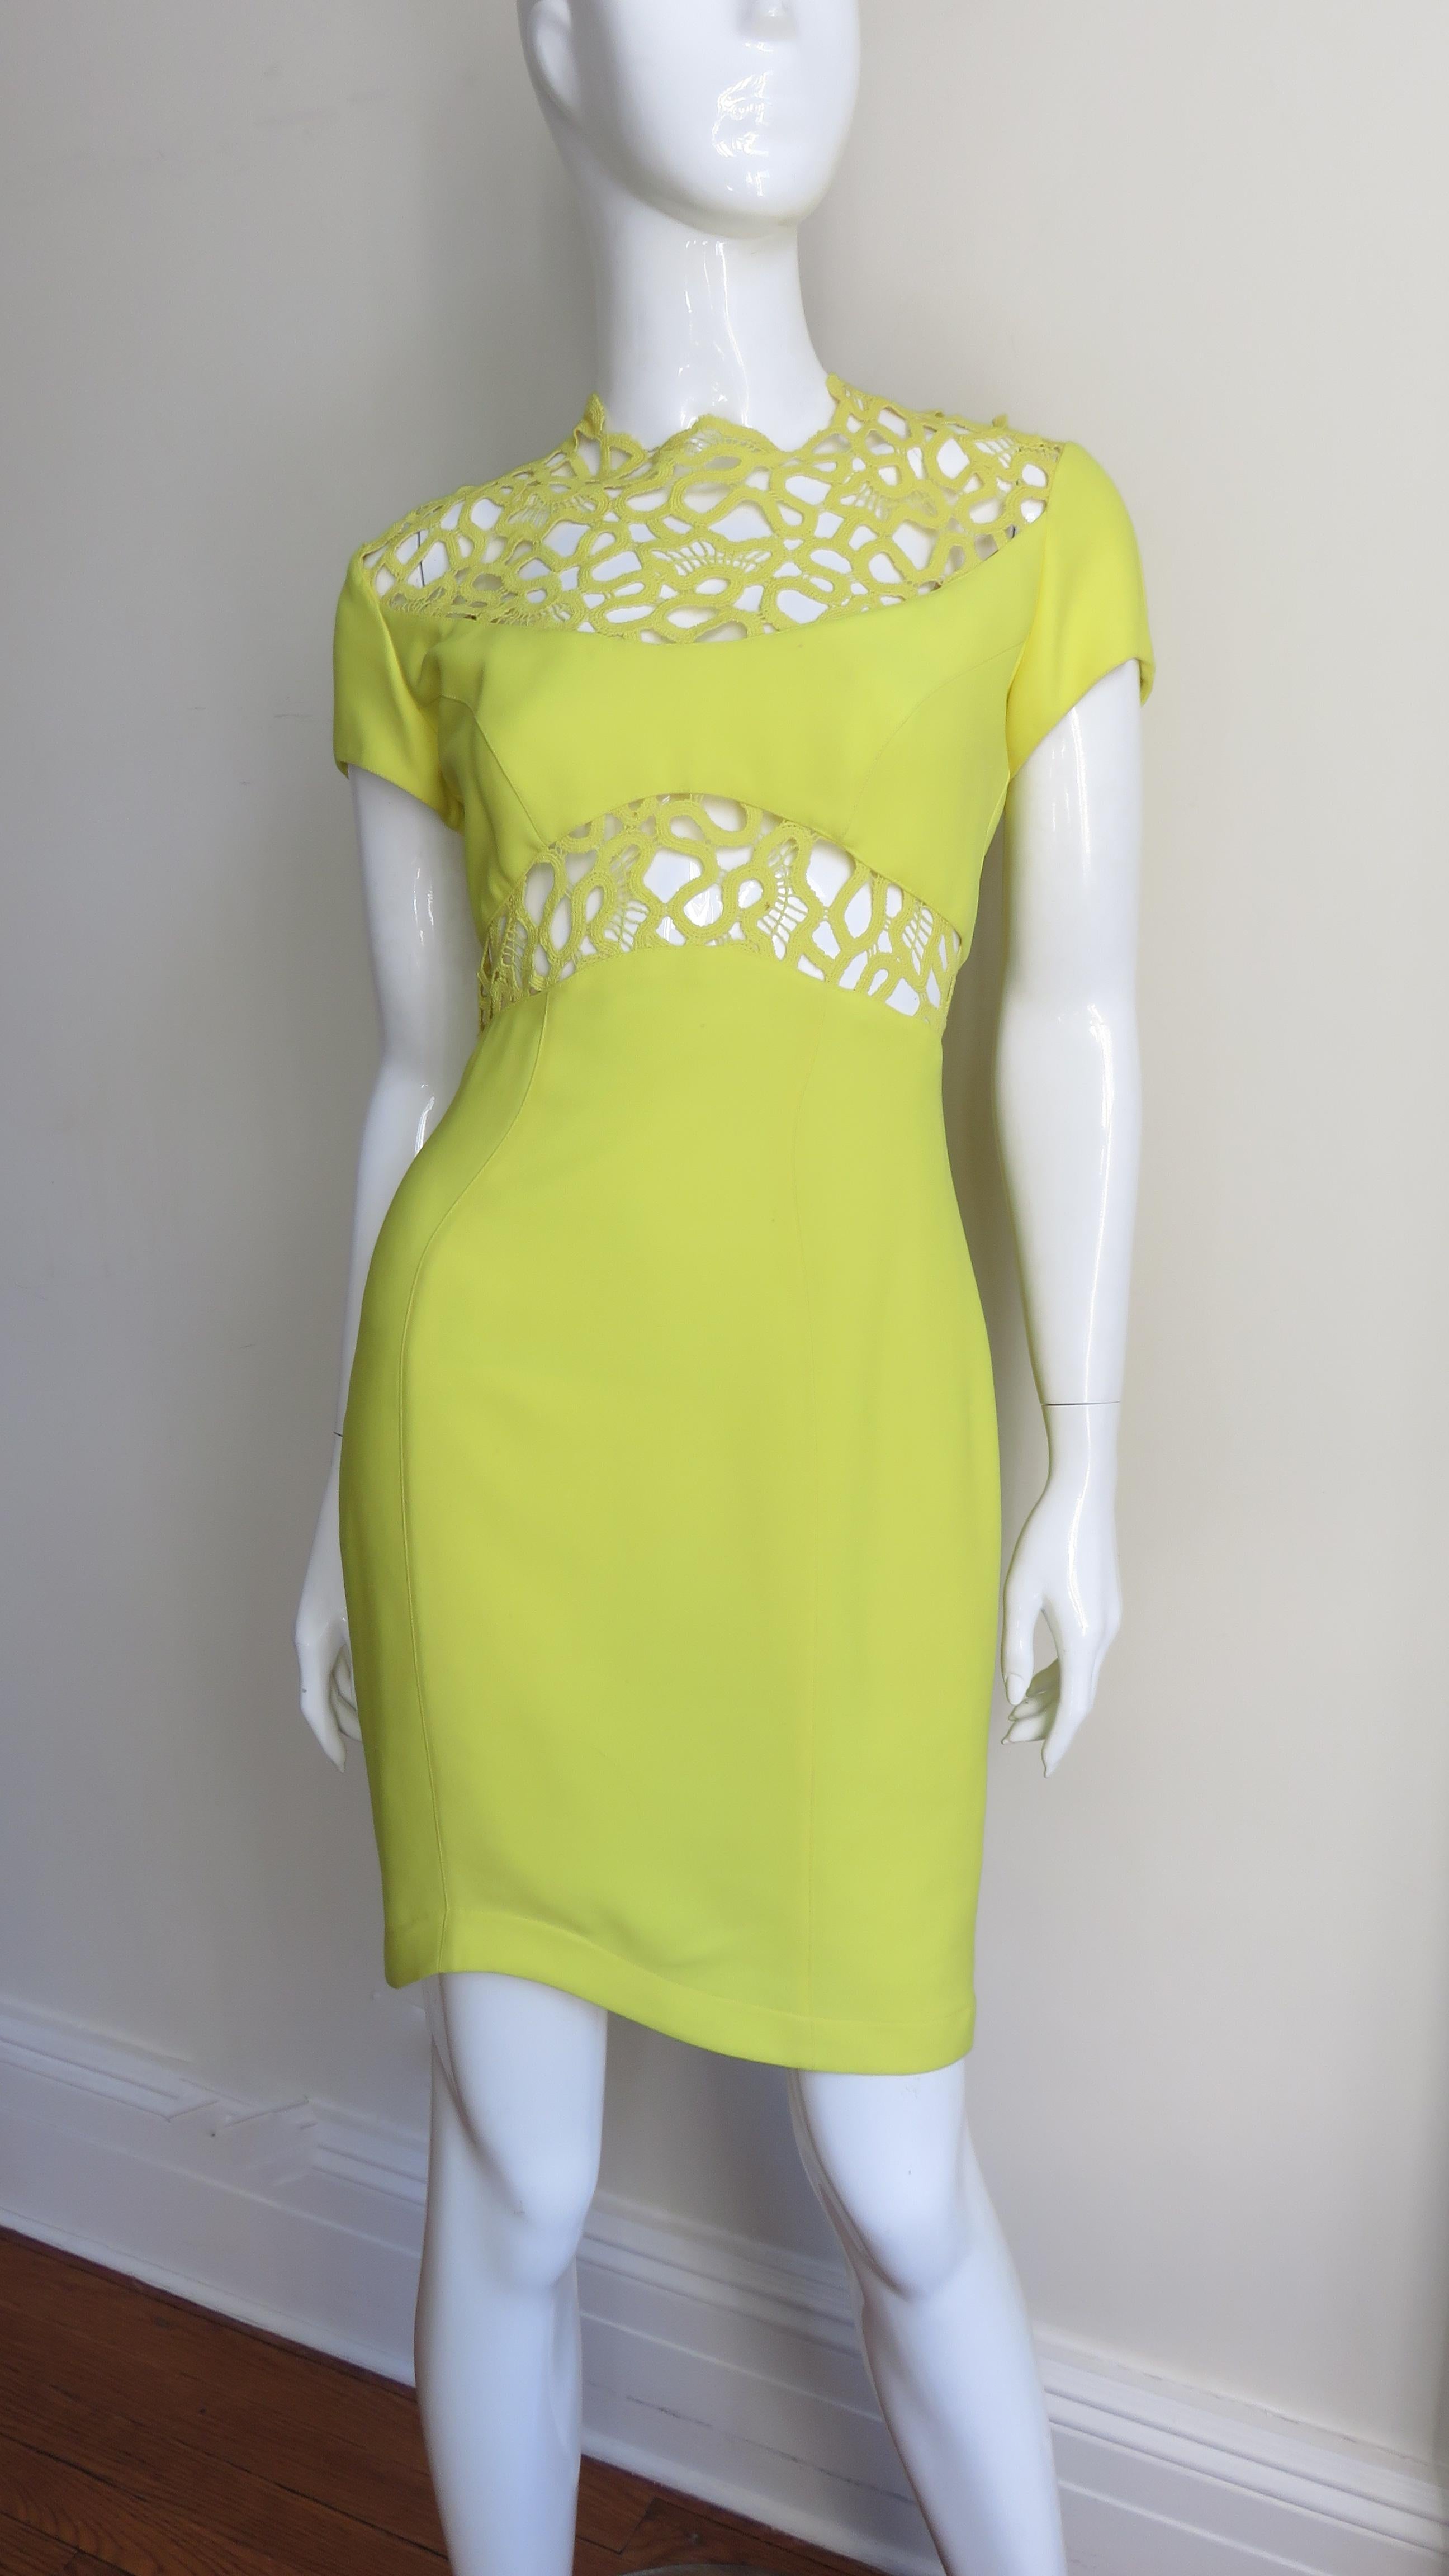 A stunning brilliant yellow green silk bodycon dress from Thierry Mugler.  It has short sleeves and is semi fitted through to the asymmetric hemline. The upper chest, upper back and waist are intricately detailed in a matching airy woven pattern